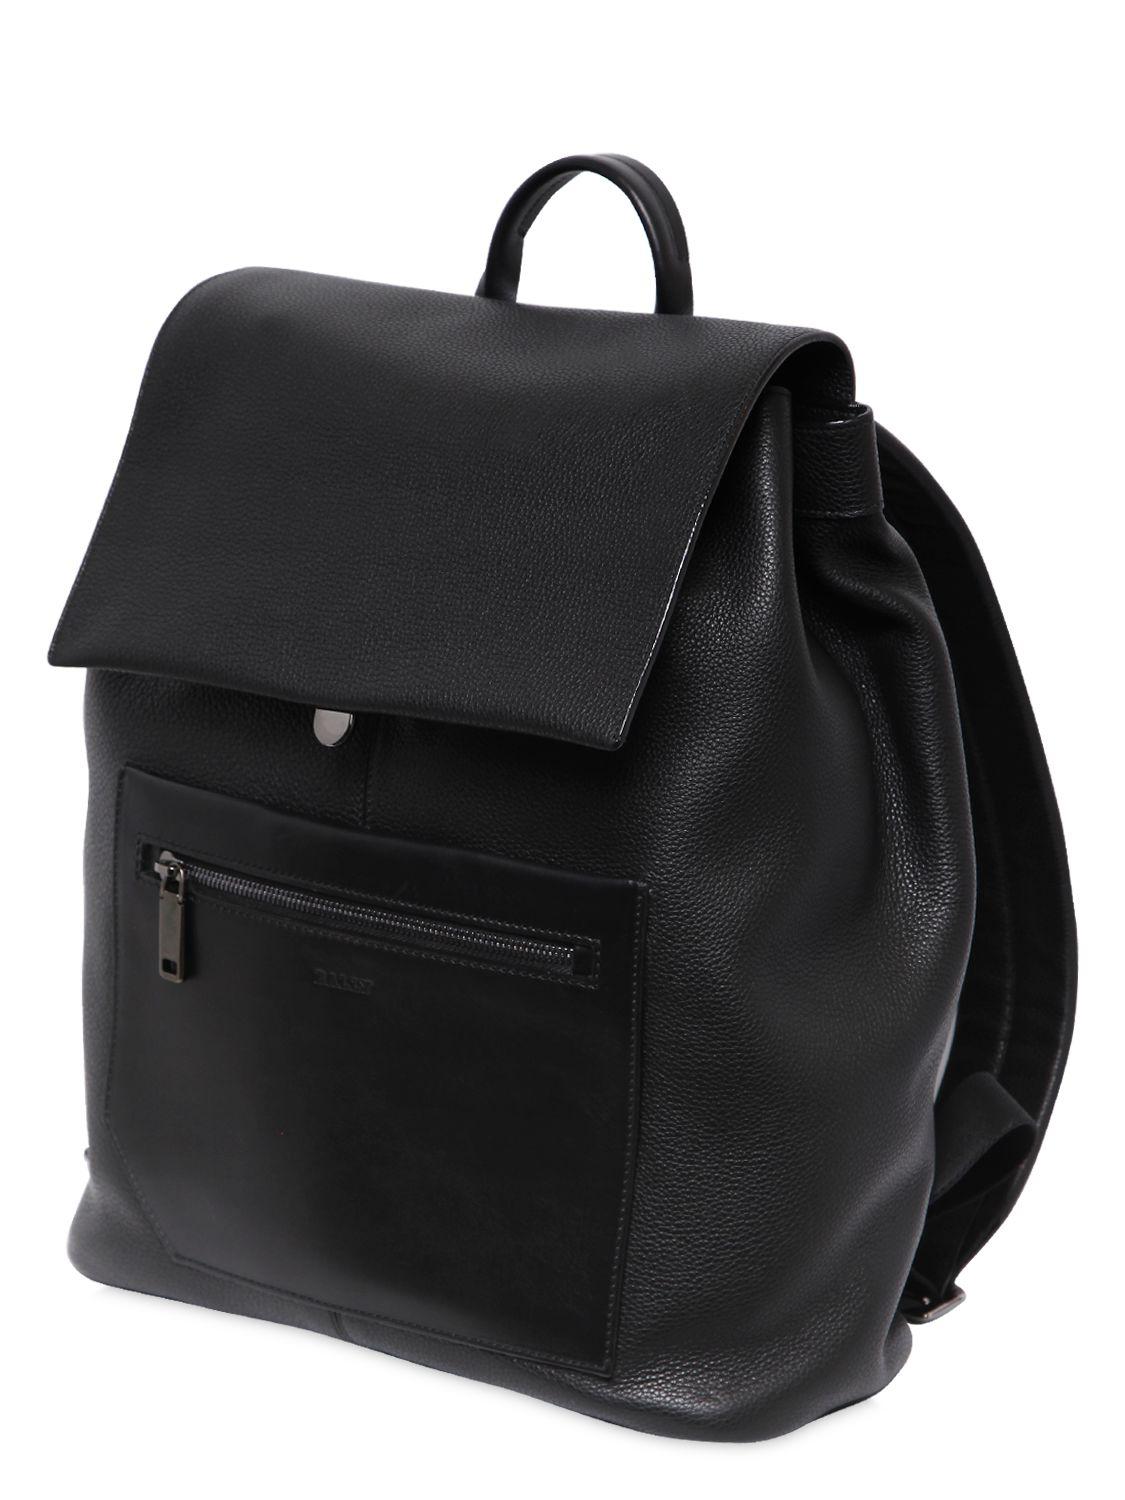 Bally Leather Backpack in Black - Lyst